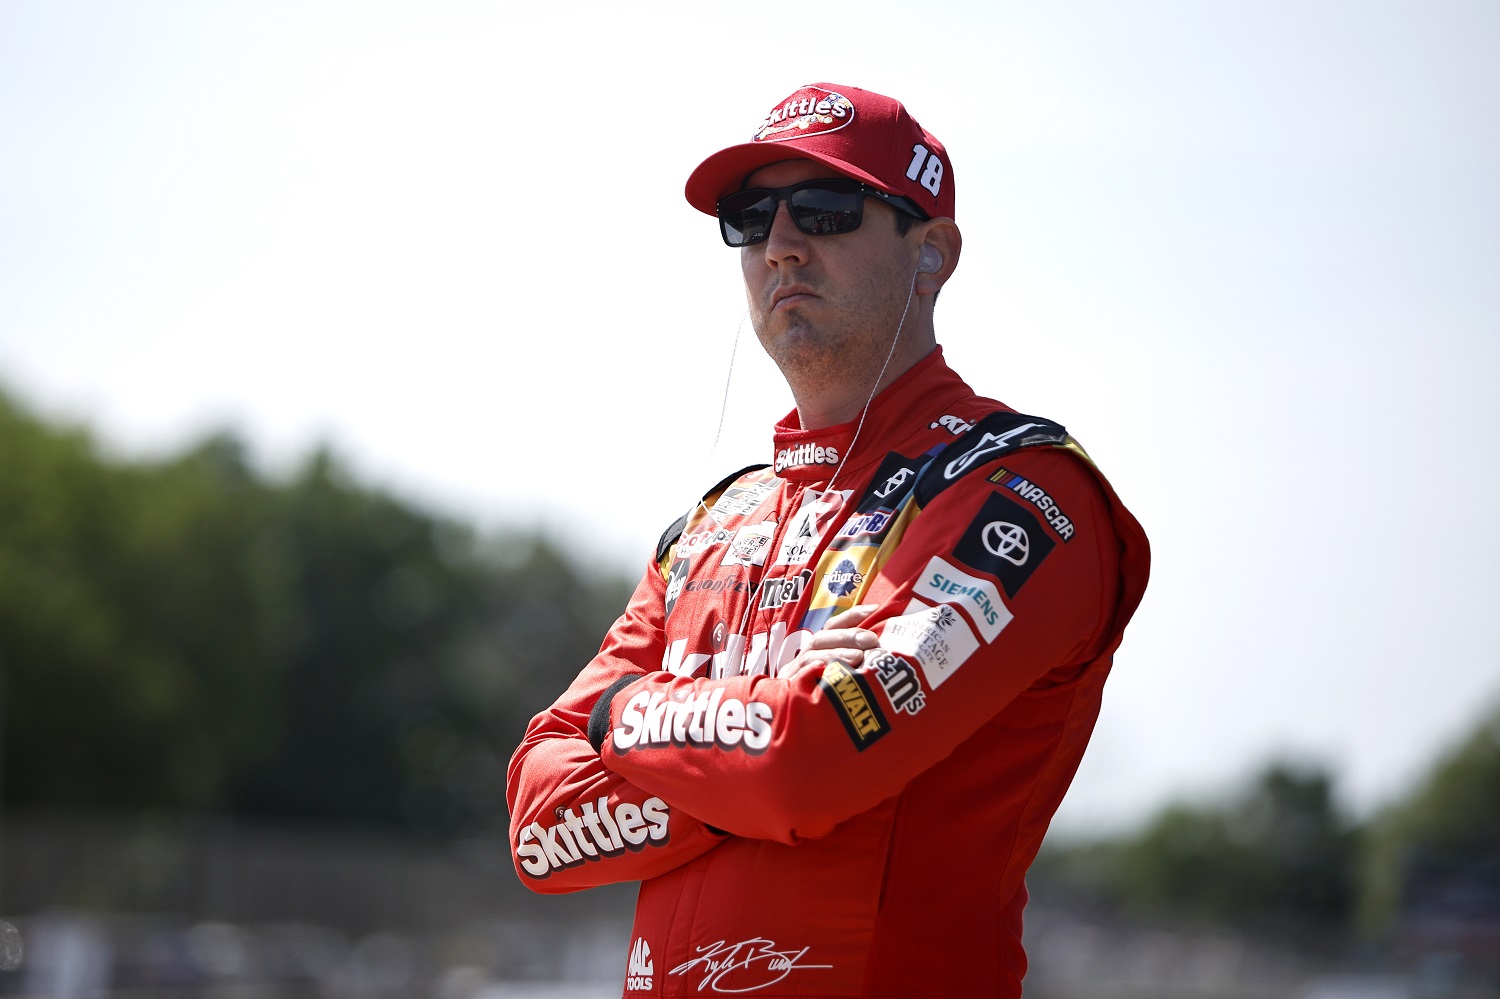 Kyle Busch looks on during practice for the NASCAR Cup Series Kwik Trip 250 at Road America on July 02, 2022, in Elkhart Lake, Wisconsin. | Sean Gardner/Getty Images